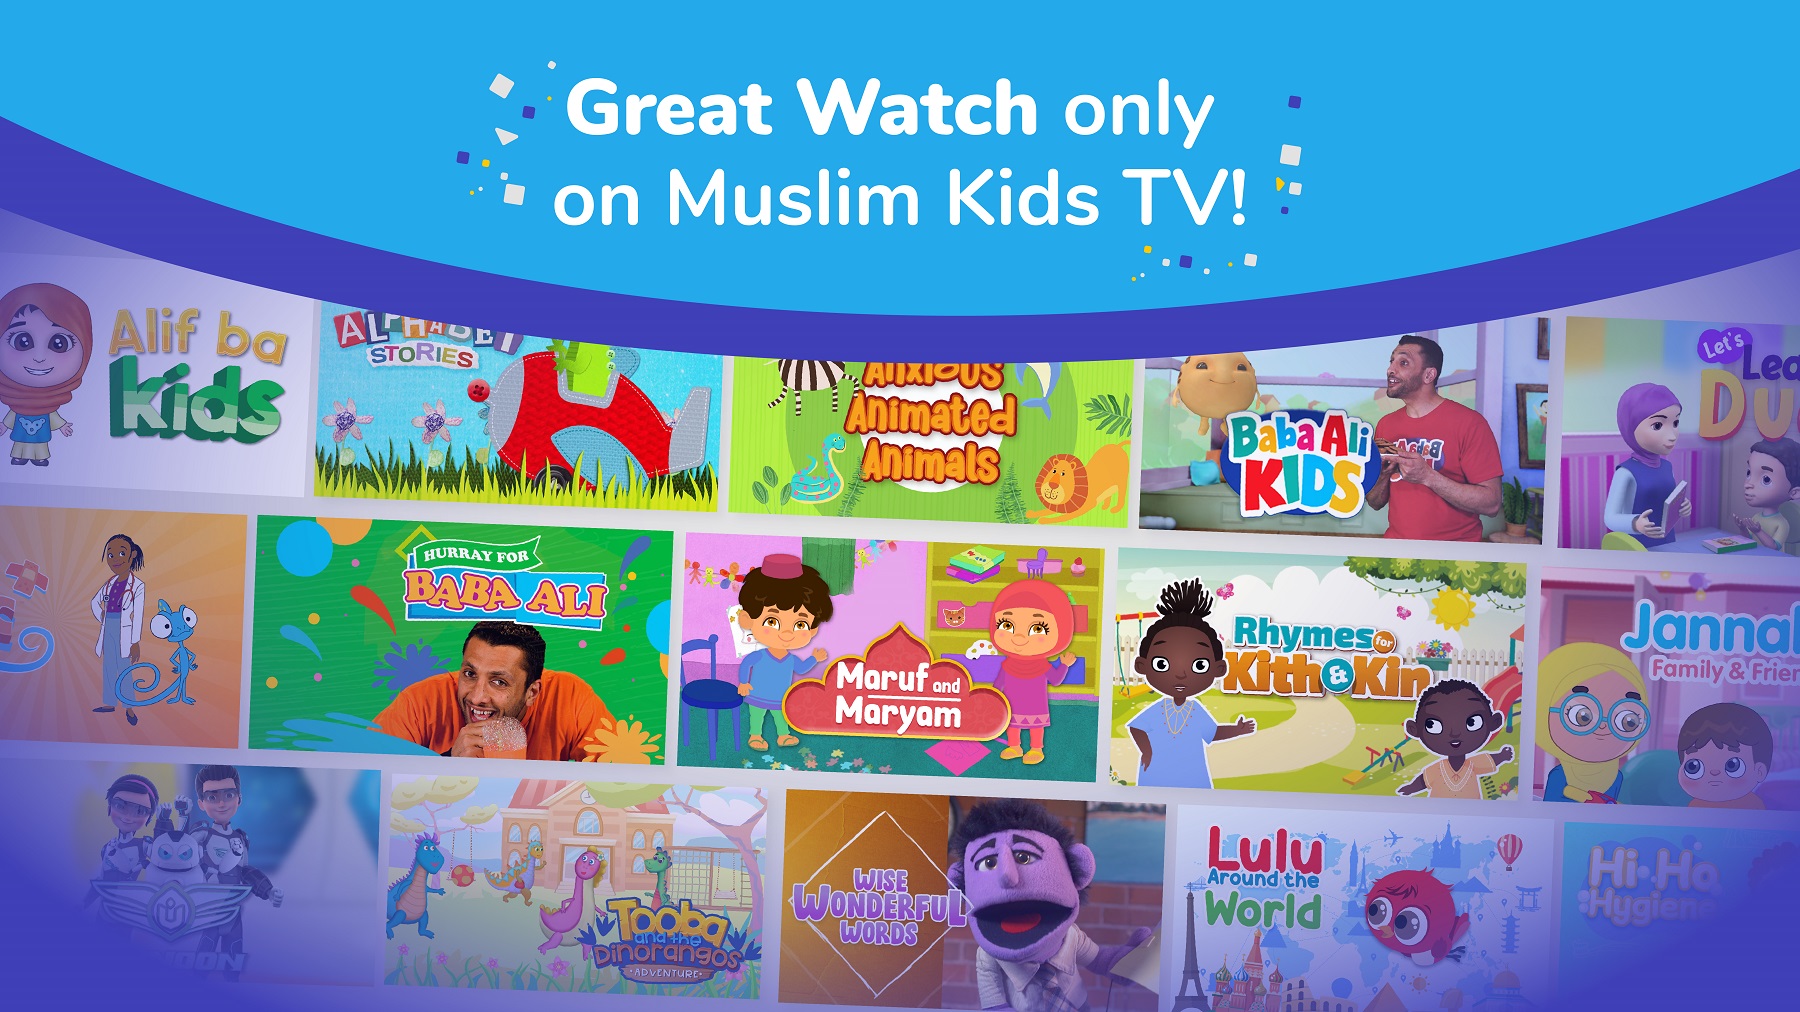 Great to Watch only on Muslim Kids TV